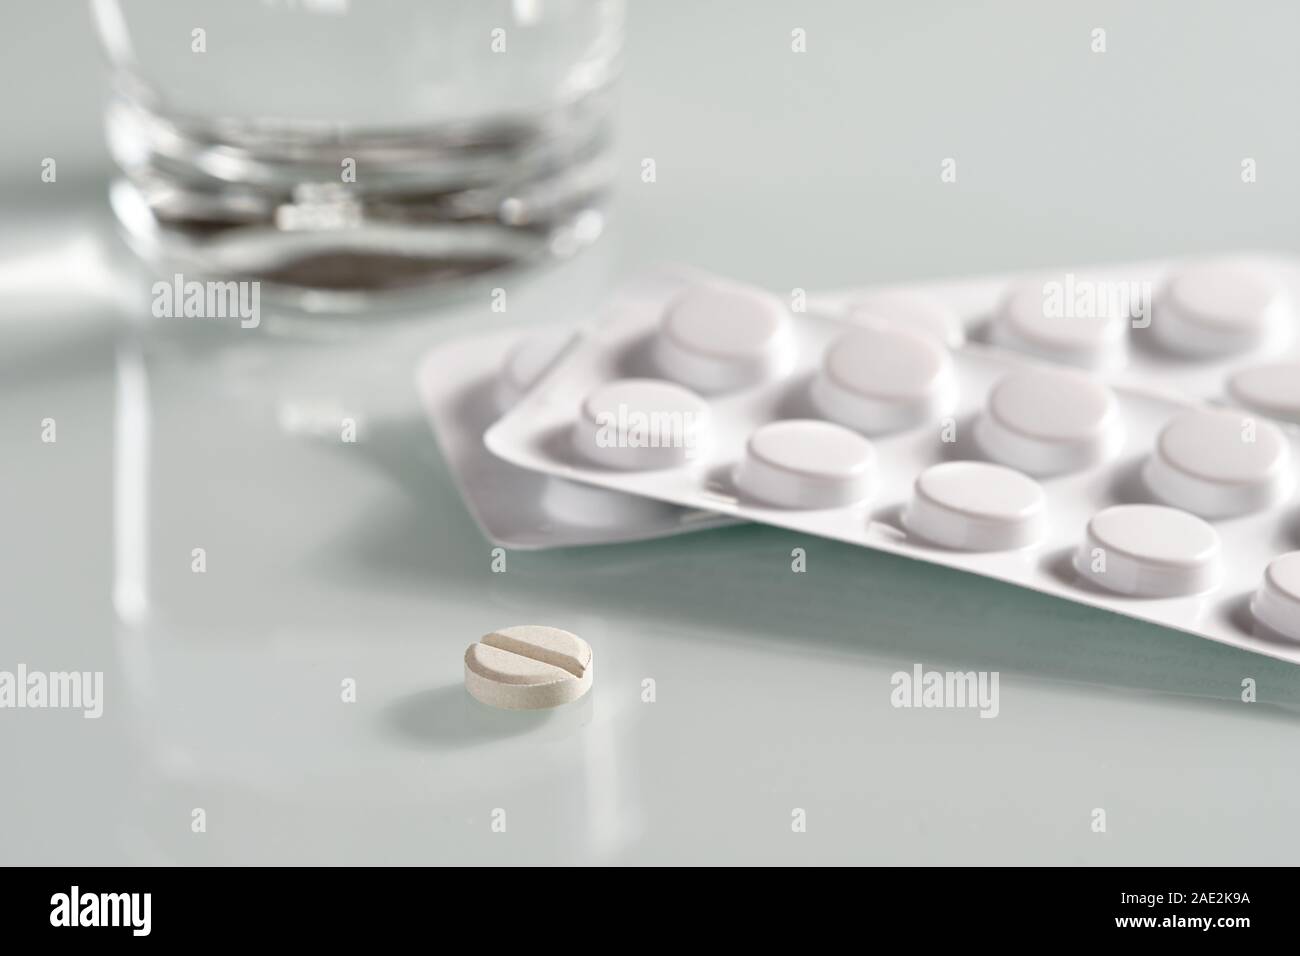 White still life with an antibiotic pill lying on a glass plate in front of two blister packs with tablets and a glass of water Stock Photo